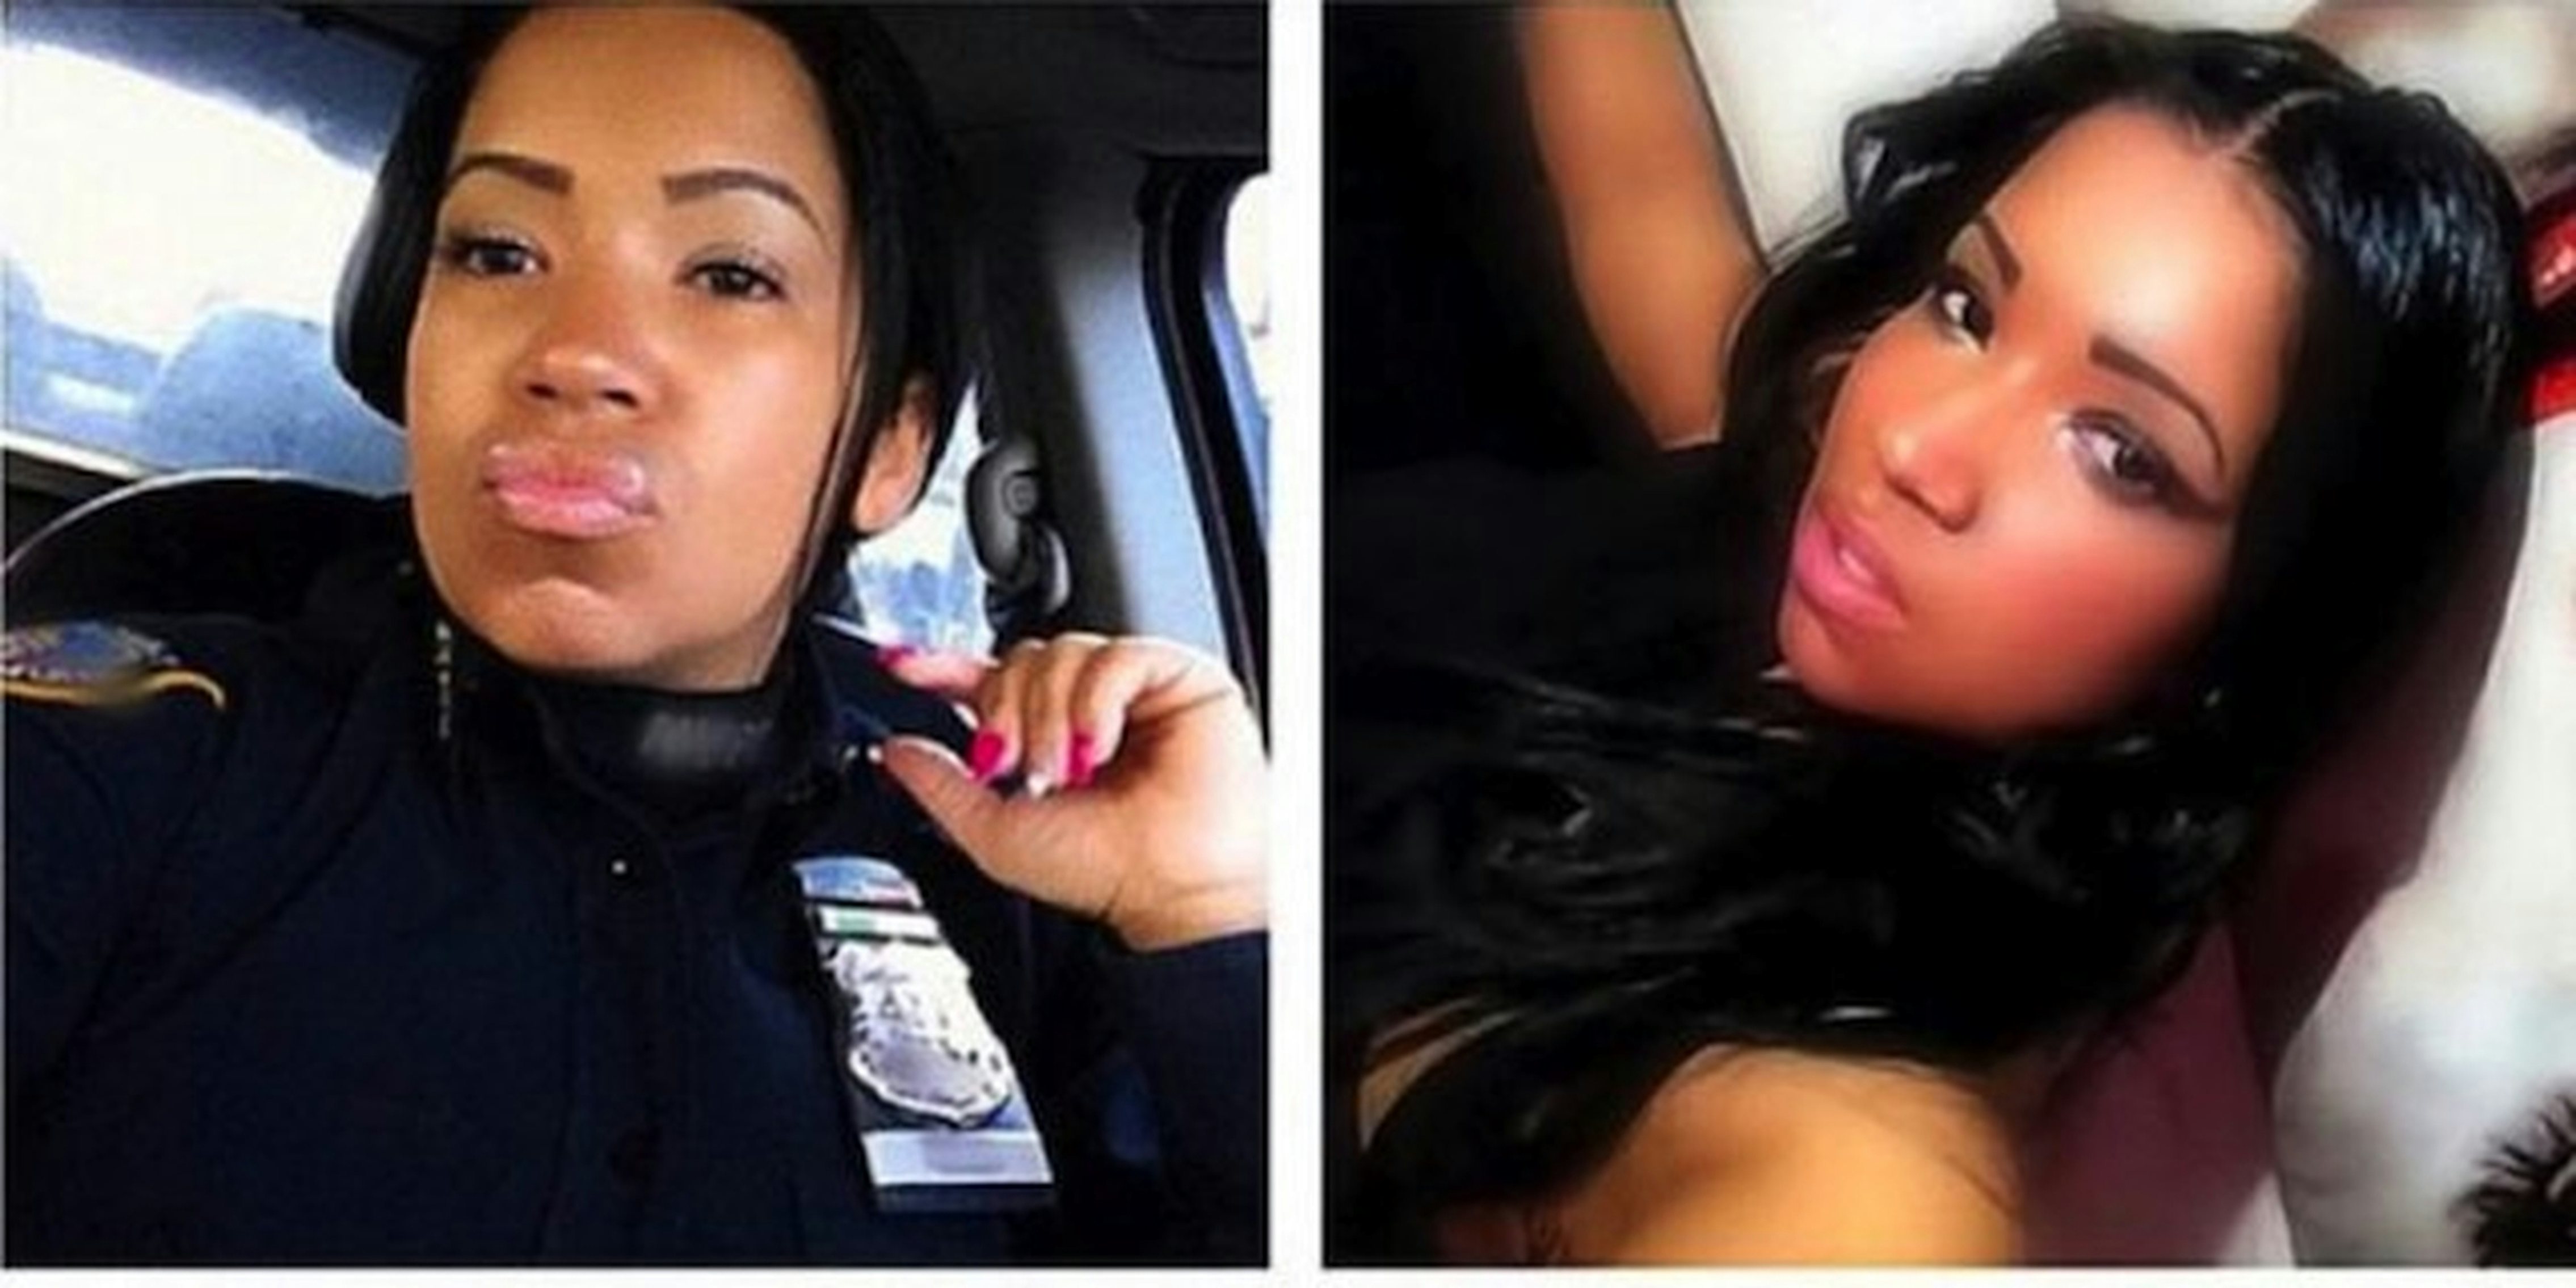 The Nypd Isnt Happy About These Sexy Cop Selfies The Daily Dot